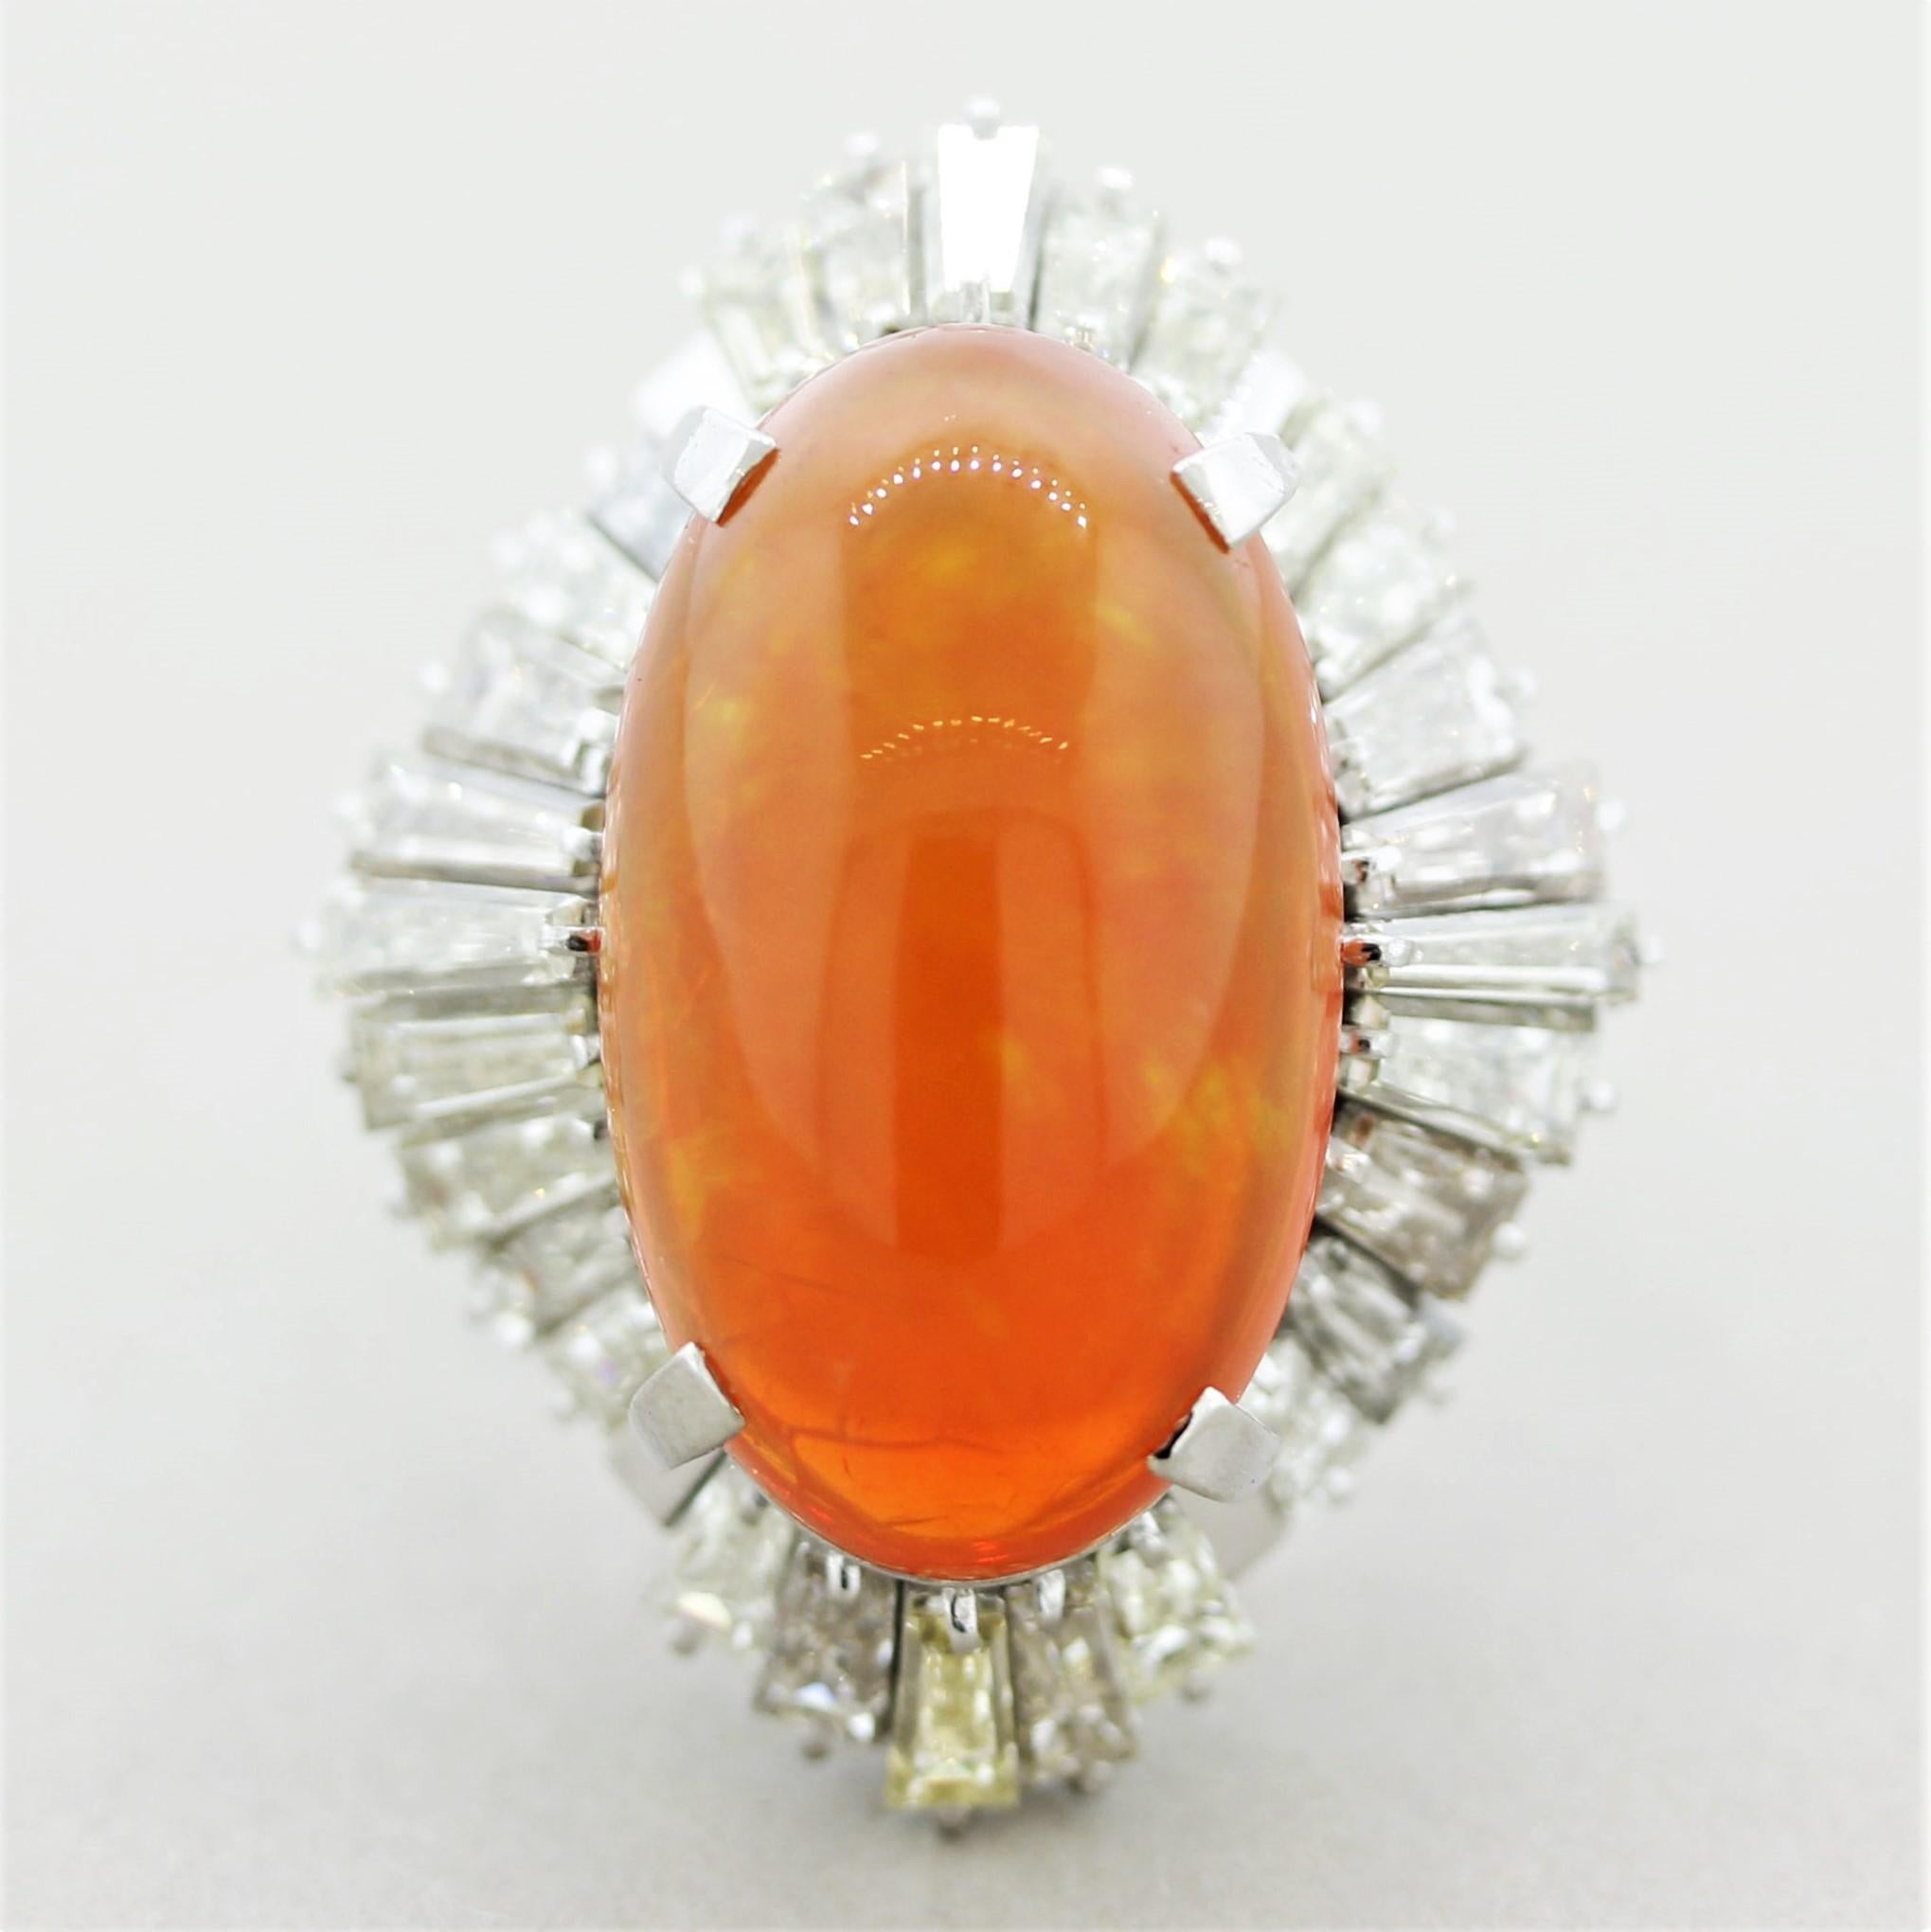 A large and impressive fire opal weighing 13.17 carats! It has a vibrant orange color with great play-of-color as flashes of red, orange, and green can be seen as the stone moves in the light. It is accented by 3.80 carats of baguette-cut diamonds